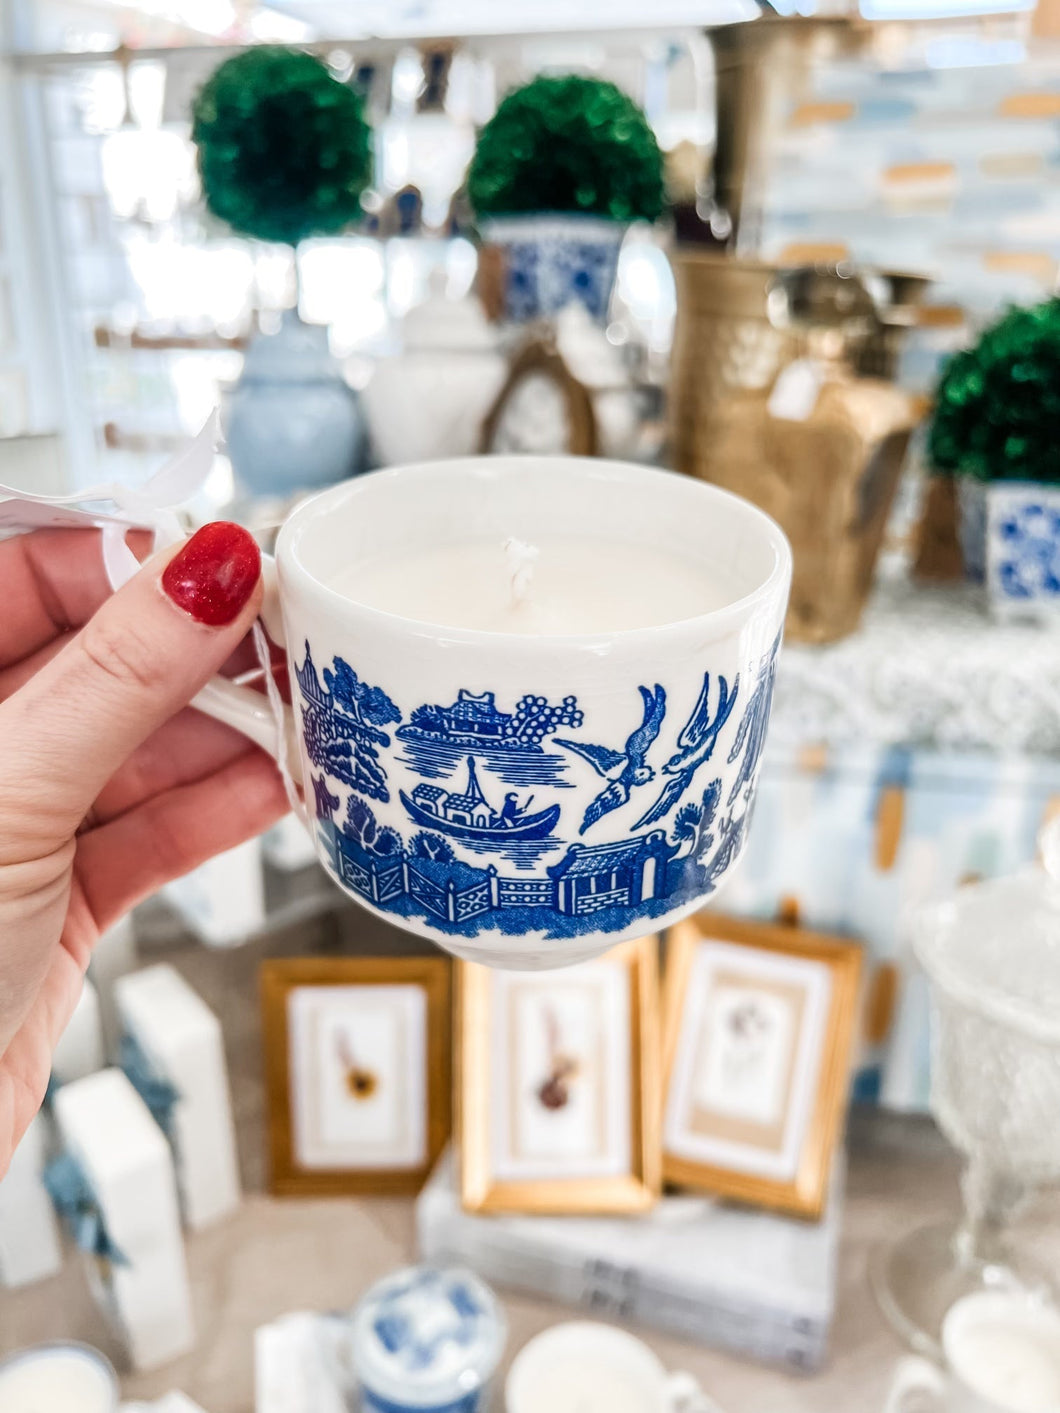 Blue Hydrangea Blue and White Tea Cup A scented candle-Belle Reve Designs by Megan Gatte